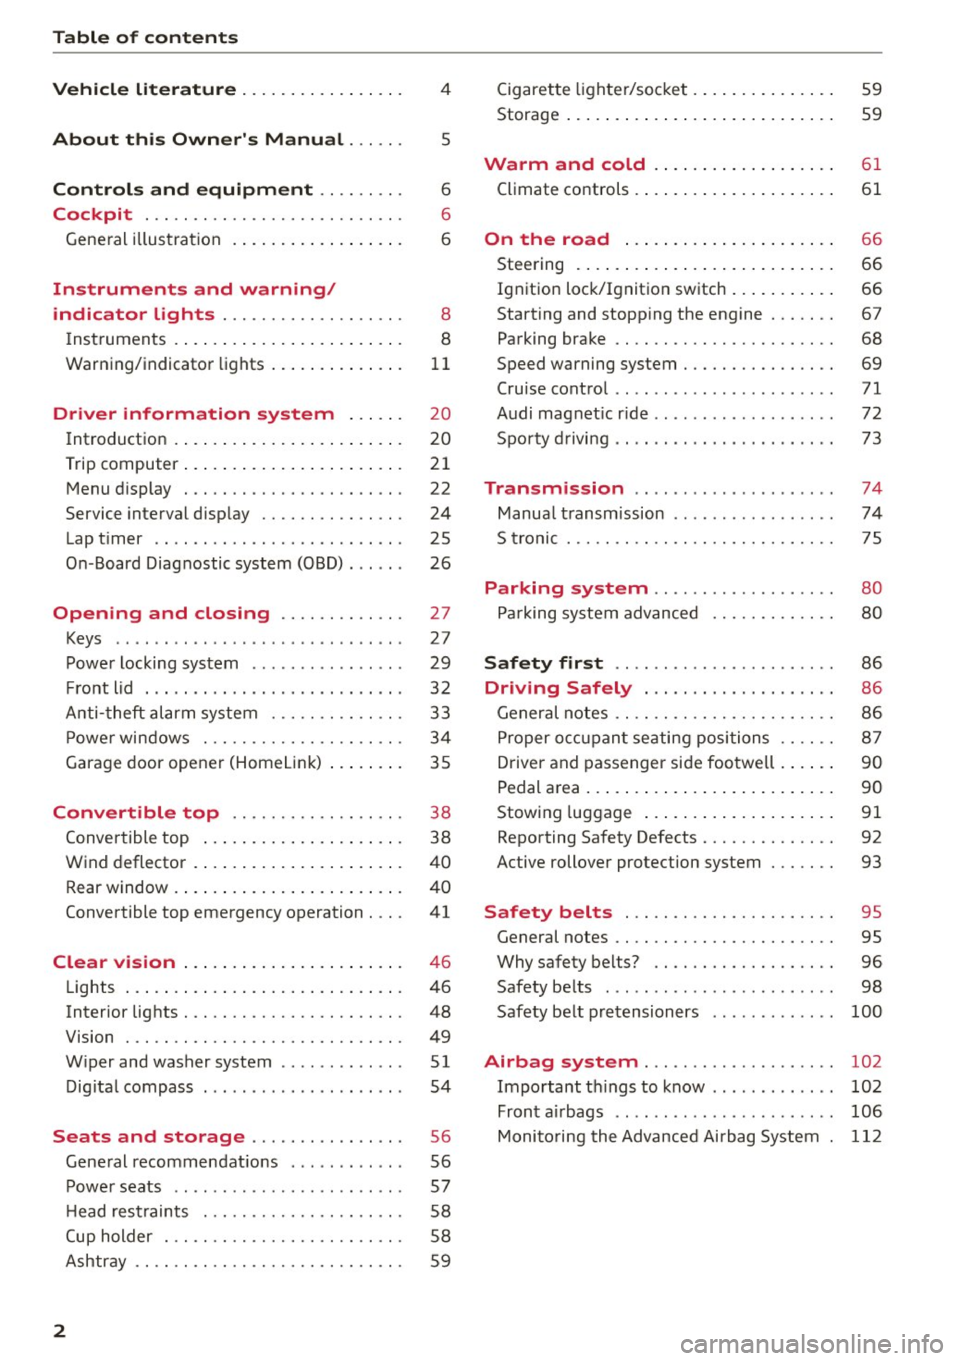 AUDI R8 SPYDER 2015  Owners Manual Table  of  contents 
Vehicle  liter ature  ..... ... .. .. .. .. . 
4 
About  this  Owners  Manual . . .  . . . 5 
Controls  and  equipment  . . . .  . .  . . . 6 
Cockpit  . . .  . .  . . . . . .  .